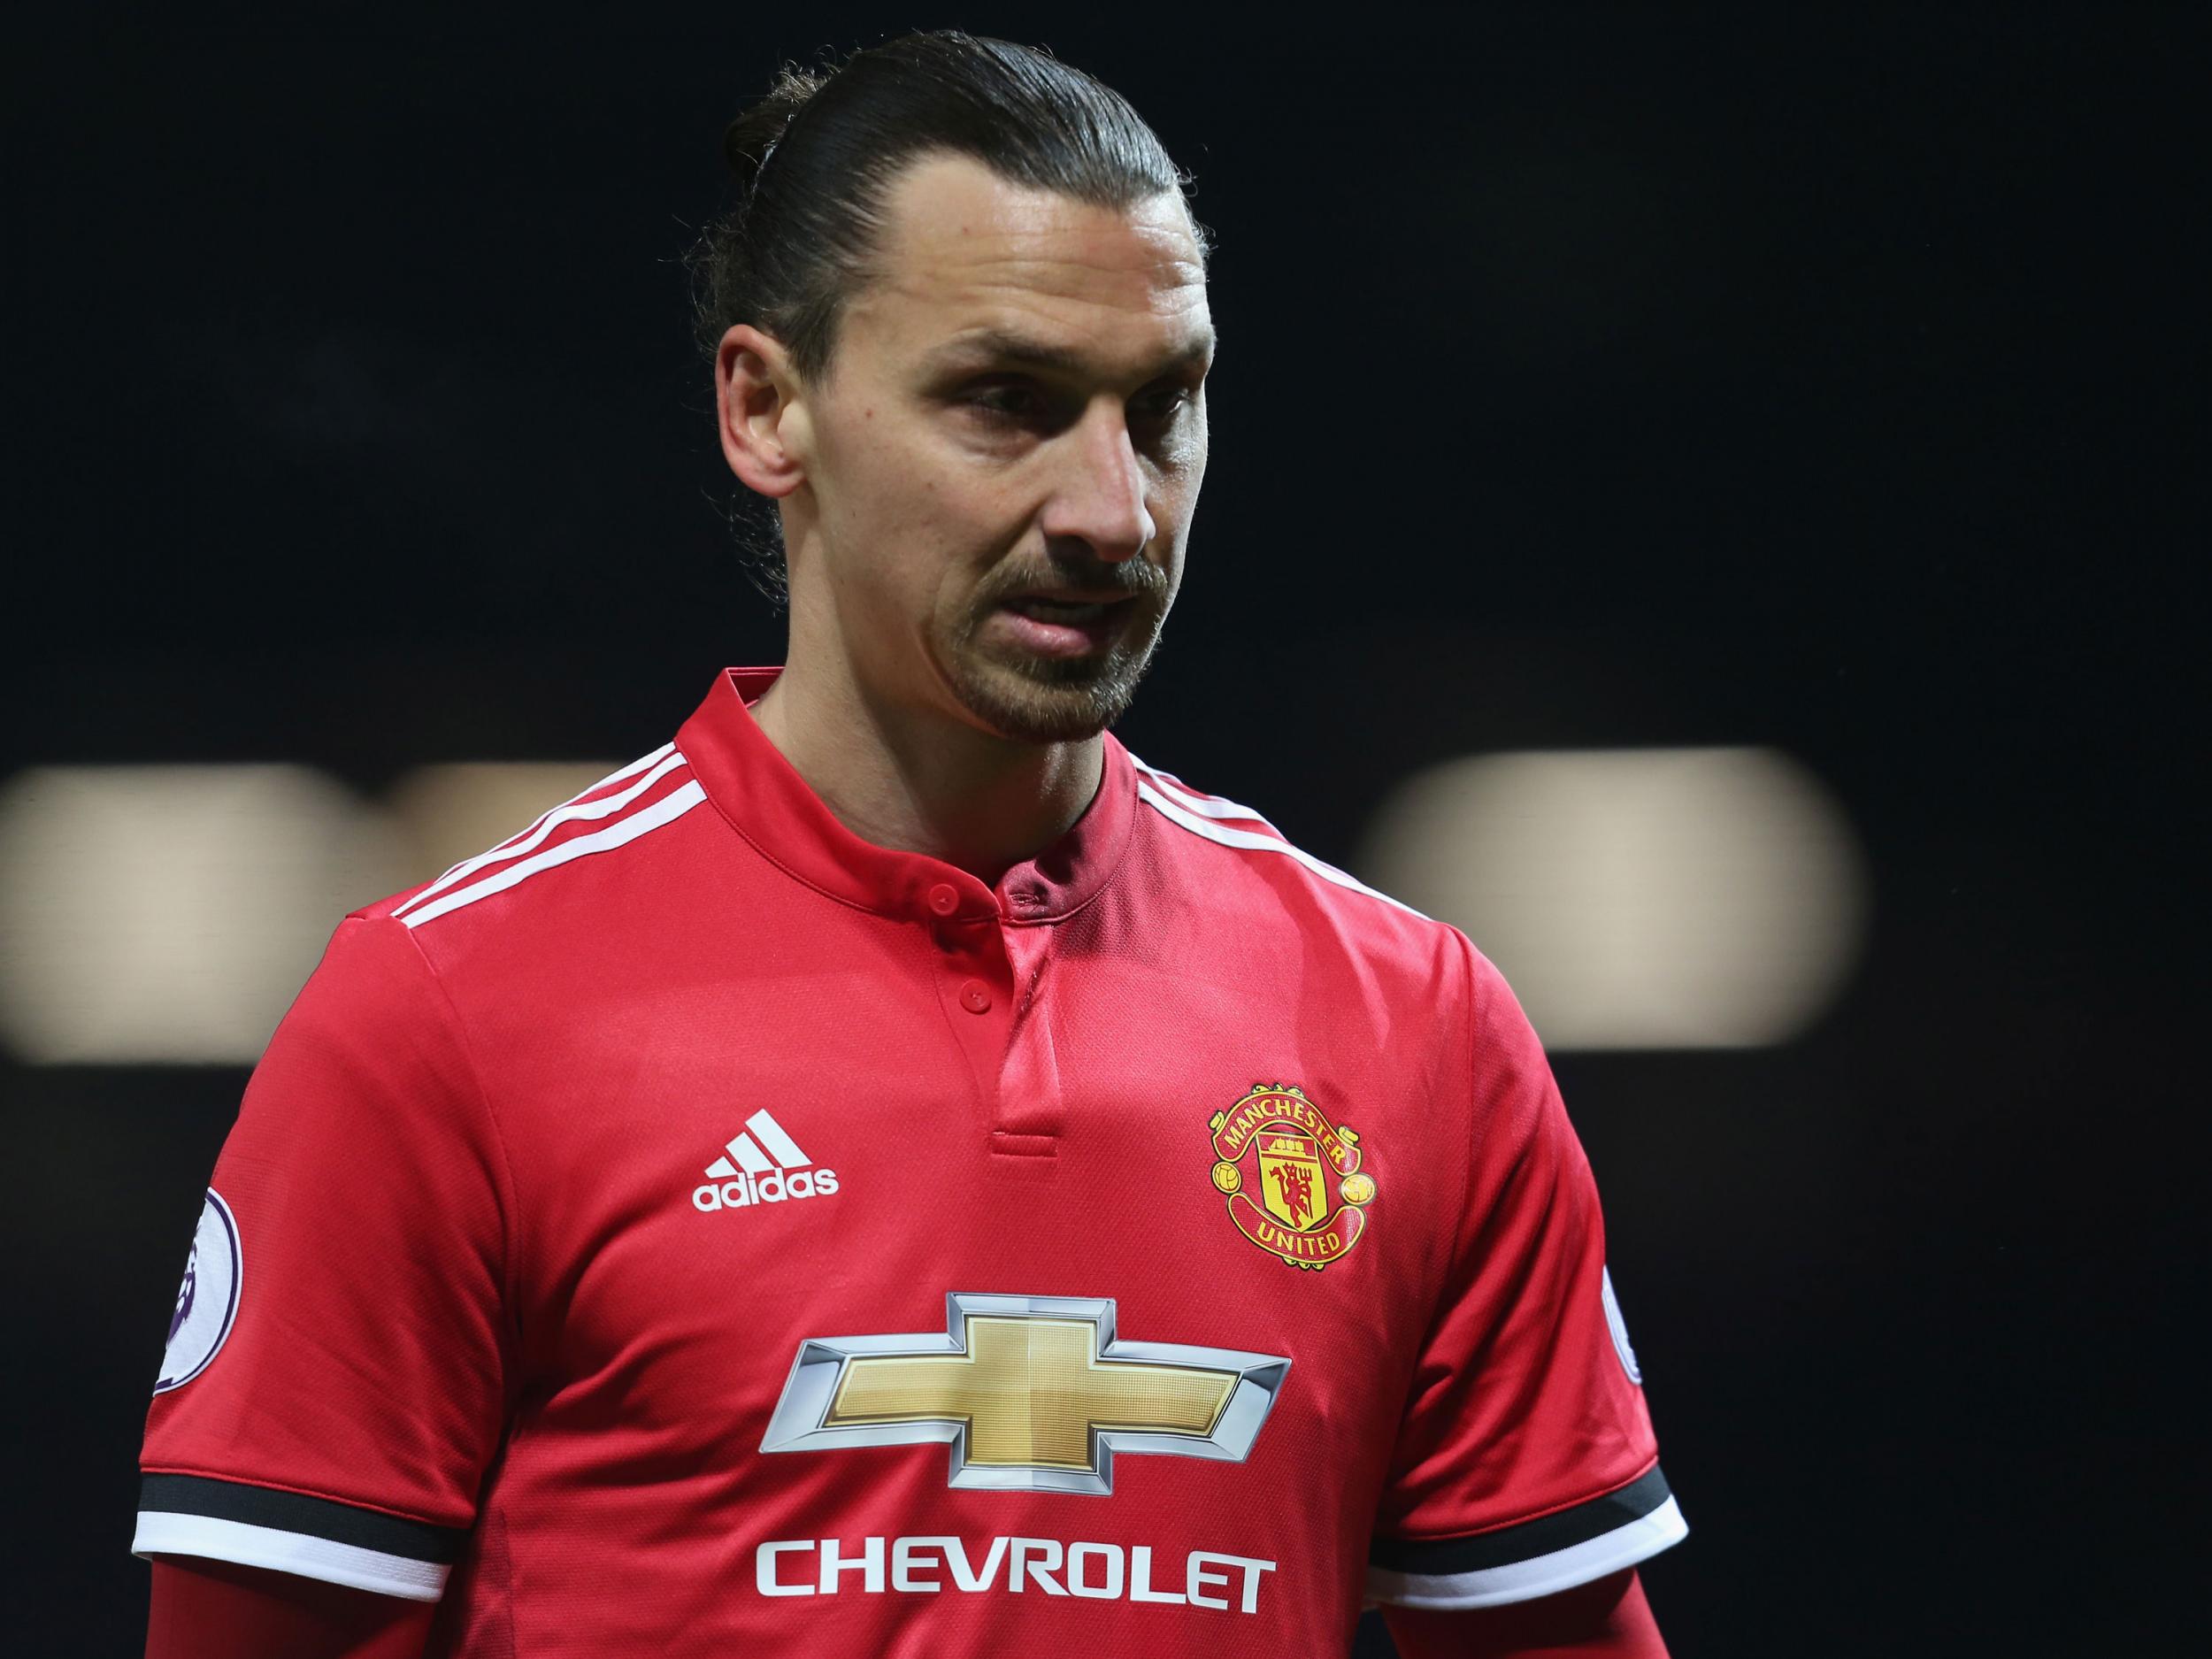 Manchester United striker Zlatan Ibrahimovic&apos;s betting firm launch postponed amid FA concerns